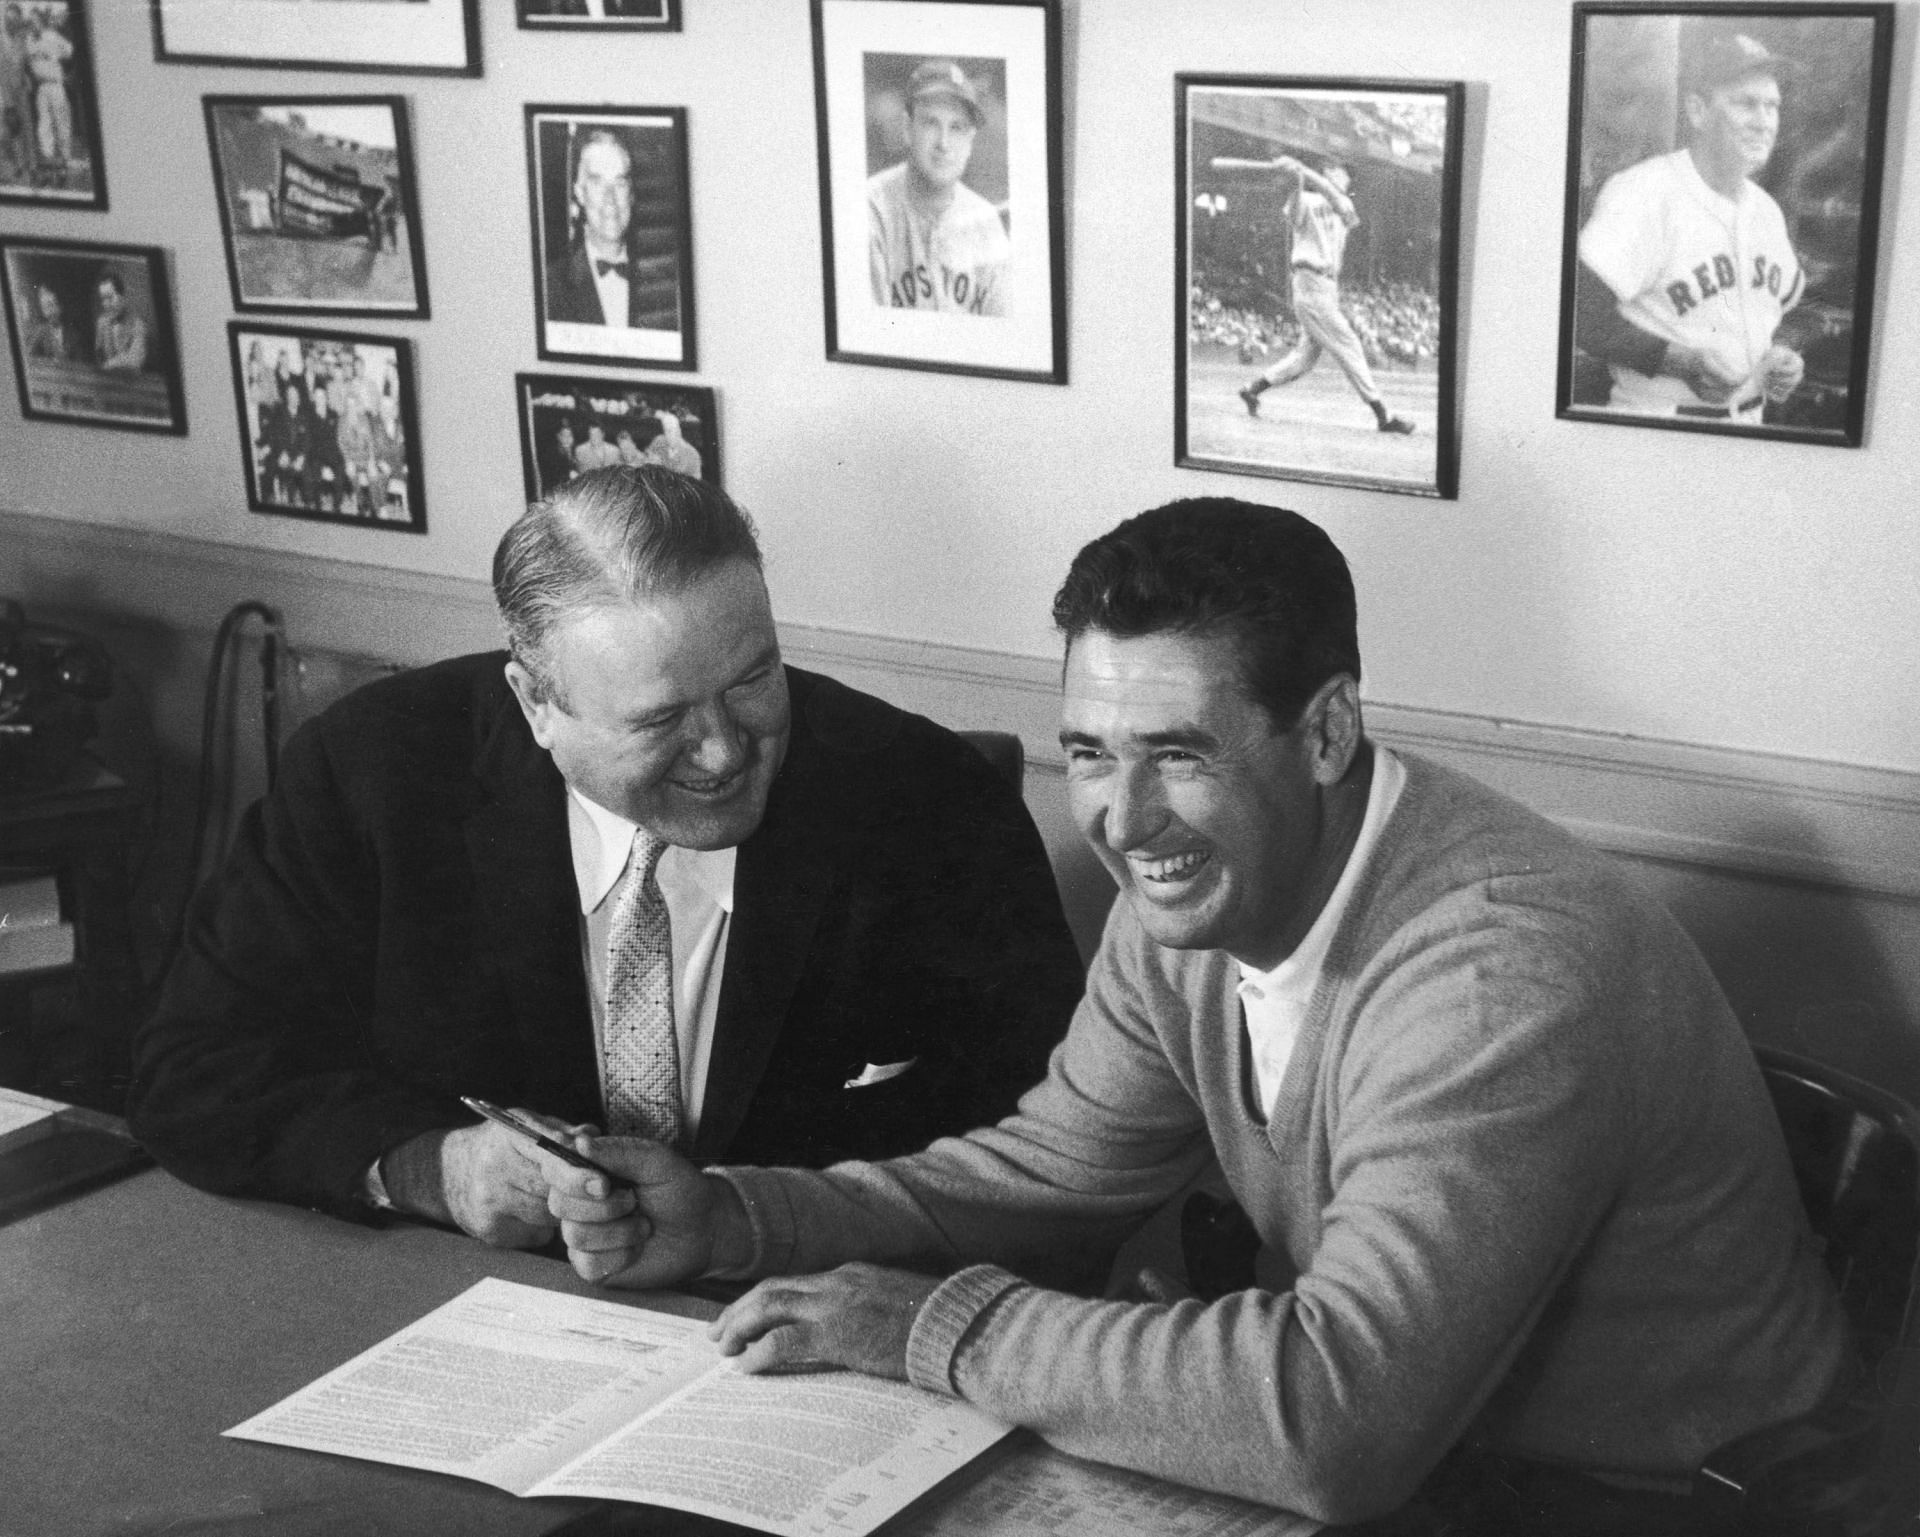 Ted Williams Dies: BOSTON - CIRCA 1955: (UNDATED FILE PHOTO) Baseball legend Ted (1918 - 2002) of the Boston Red Sox (R) signs a baseball contract as Boston Manager Joe Cronin (1906 - 1984) looks on in 1958. The 83-year-old Williams, who was the last major league player to bat .400 when he hit .406 in 1941, died July 5, 2002 at Citrus County Memorial Hospital in Florida. He died of an apparent heart attack. (Photo by Getty Images)